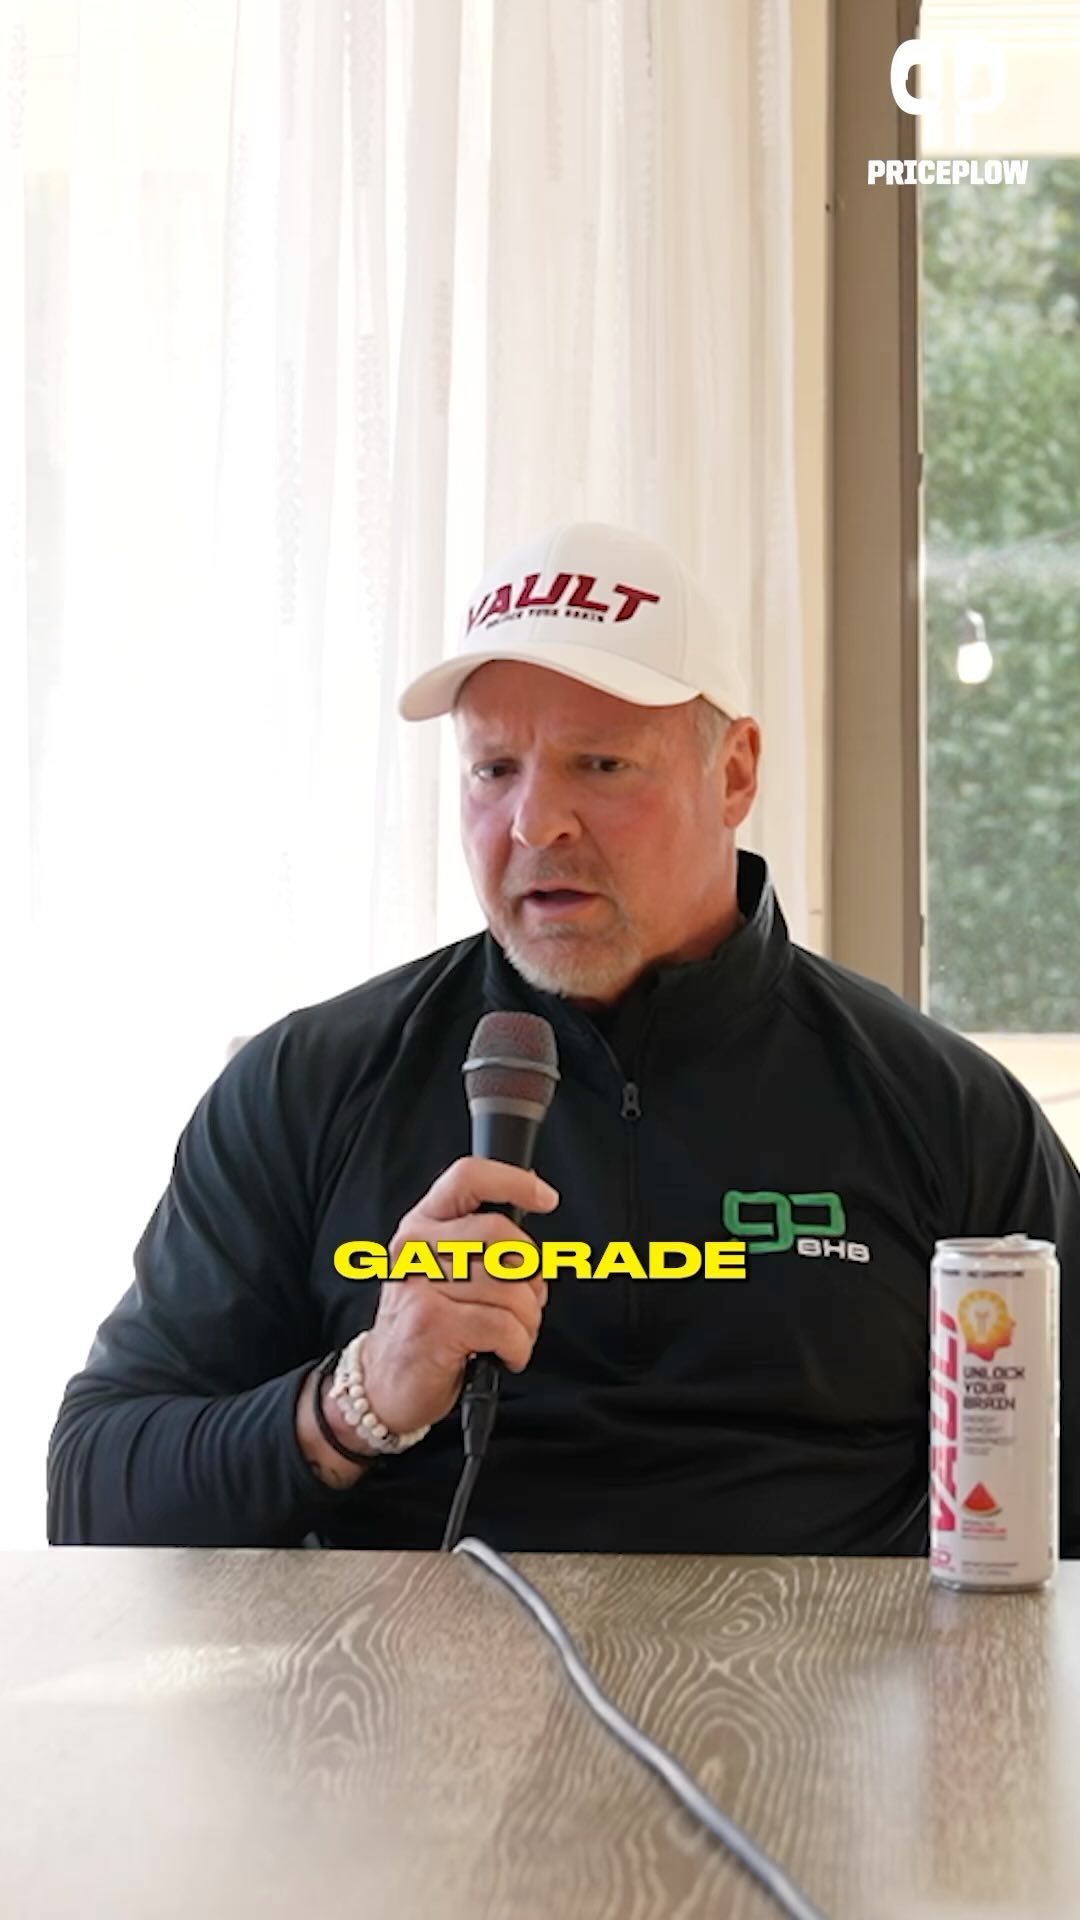 Would you take Gatorate with goBHB in it?